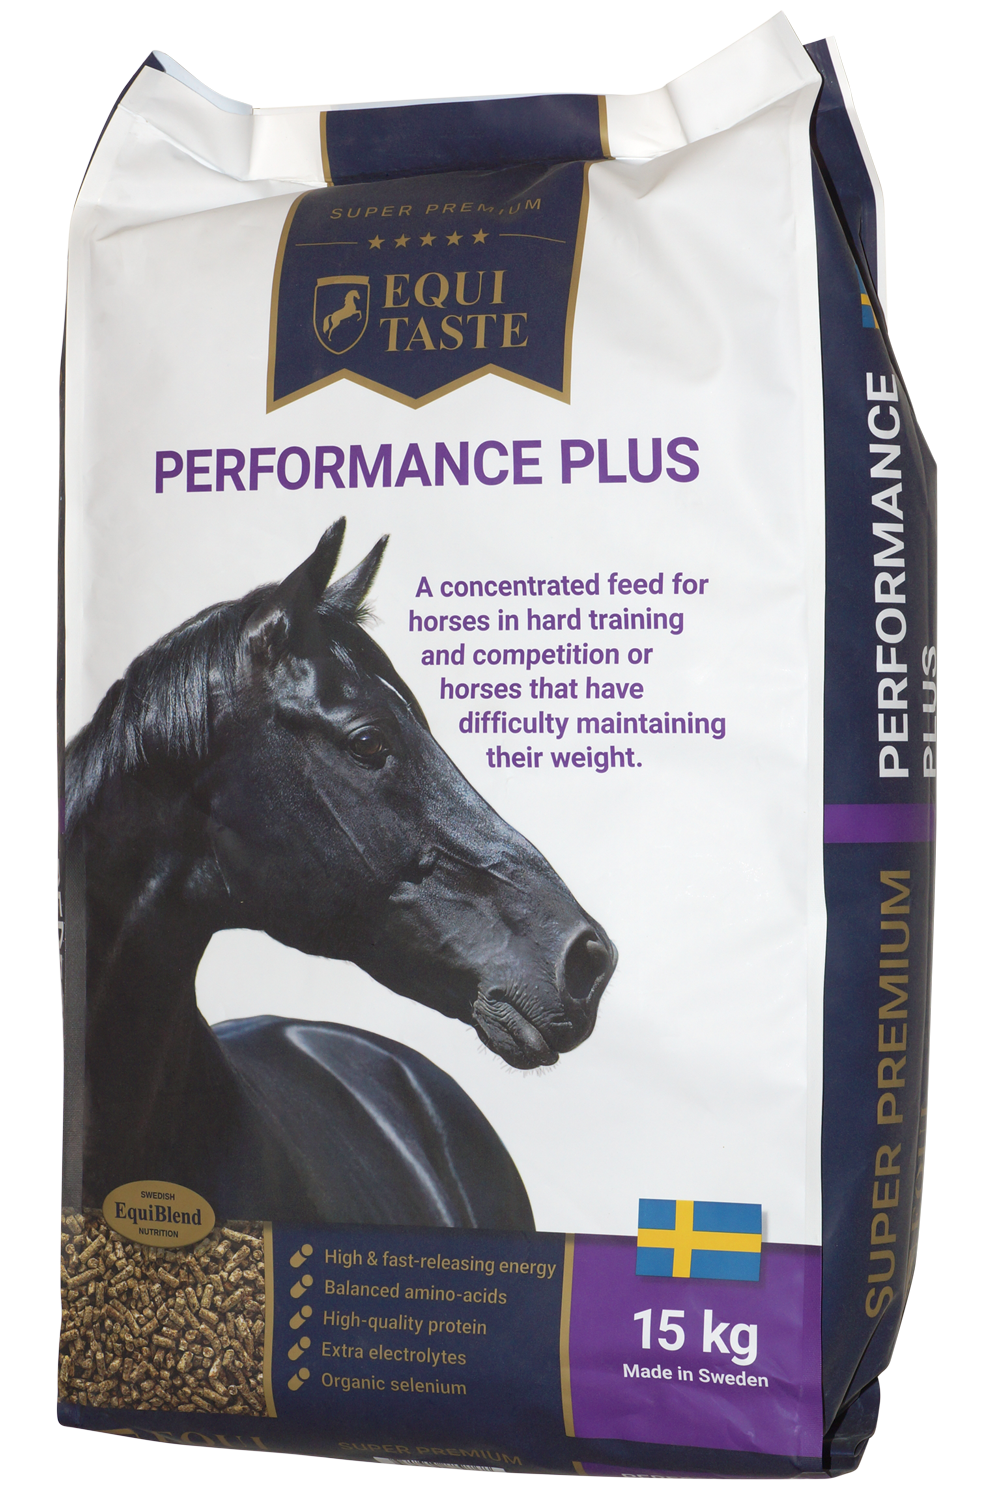 Equitaste Performance Plus, horse feed, Horse feed, concentrate, supplementary feed for horses